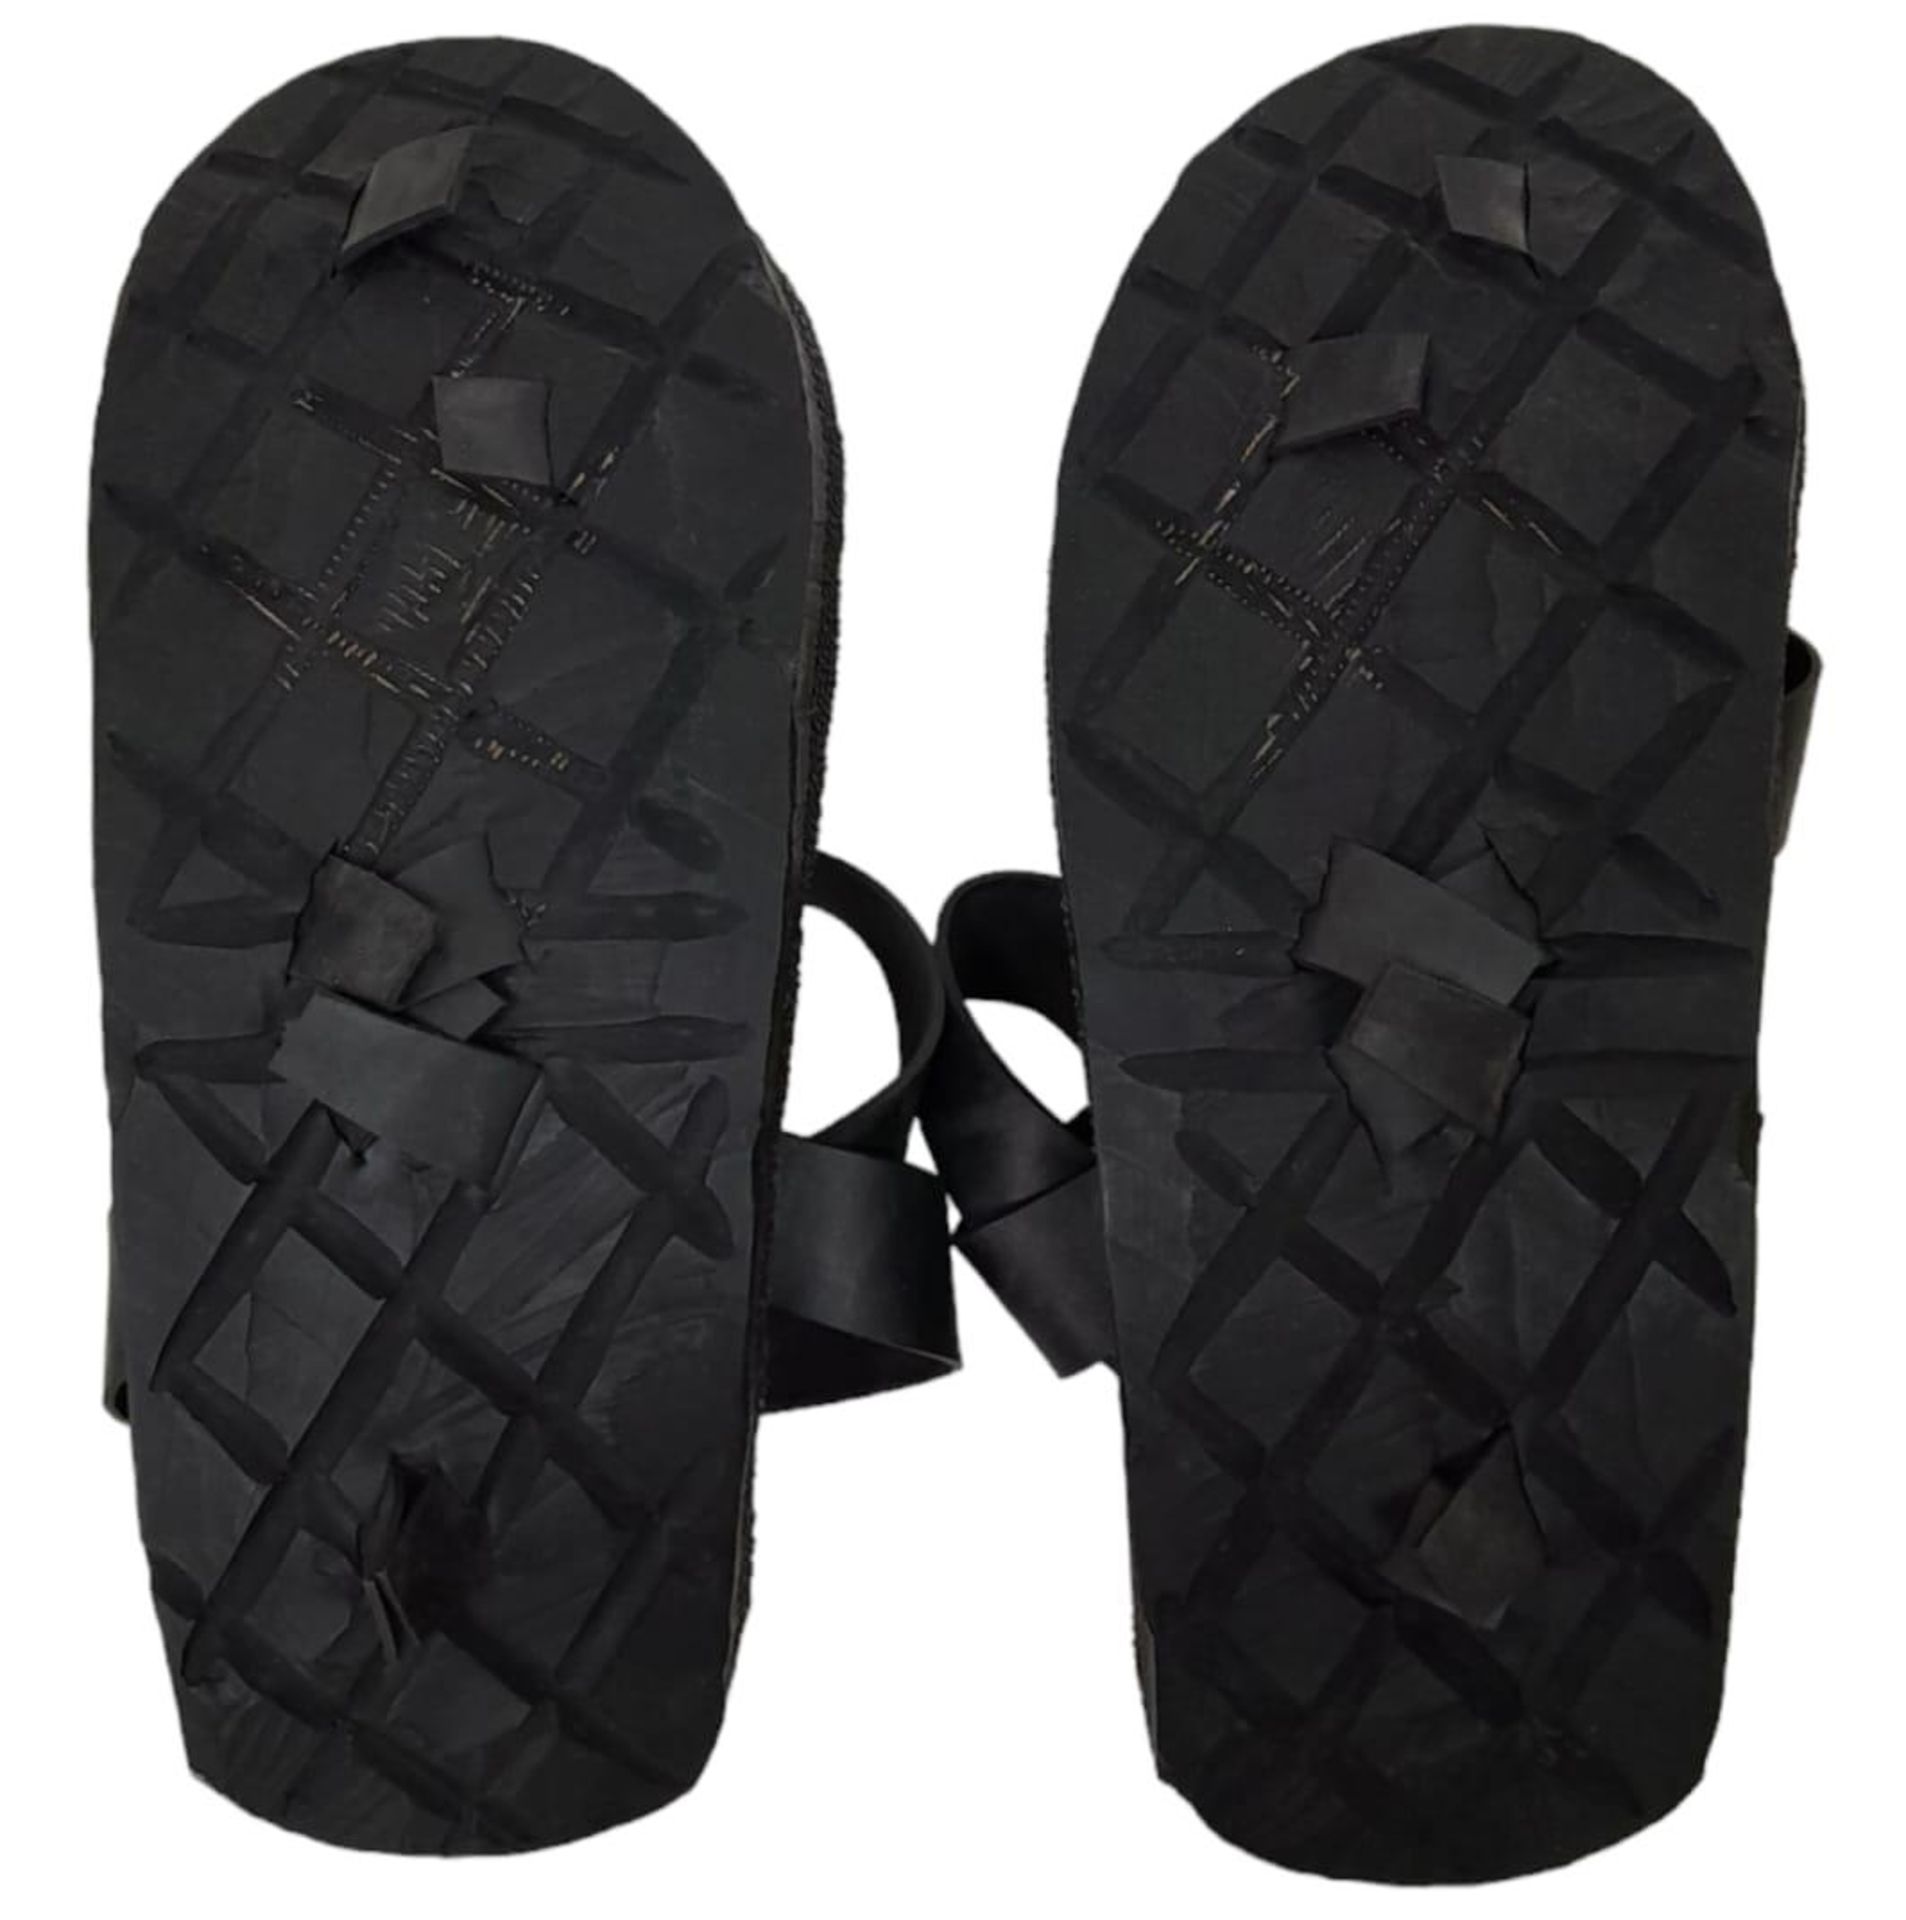 Vietnam War Era Vietcong “Ho Chi Minh” Sandals made from old truck tyres. - Image 3 of 4